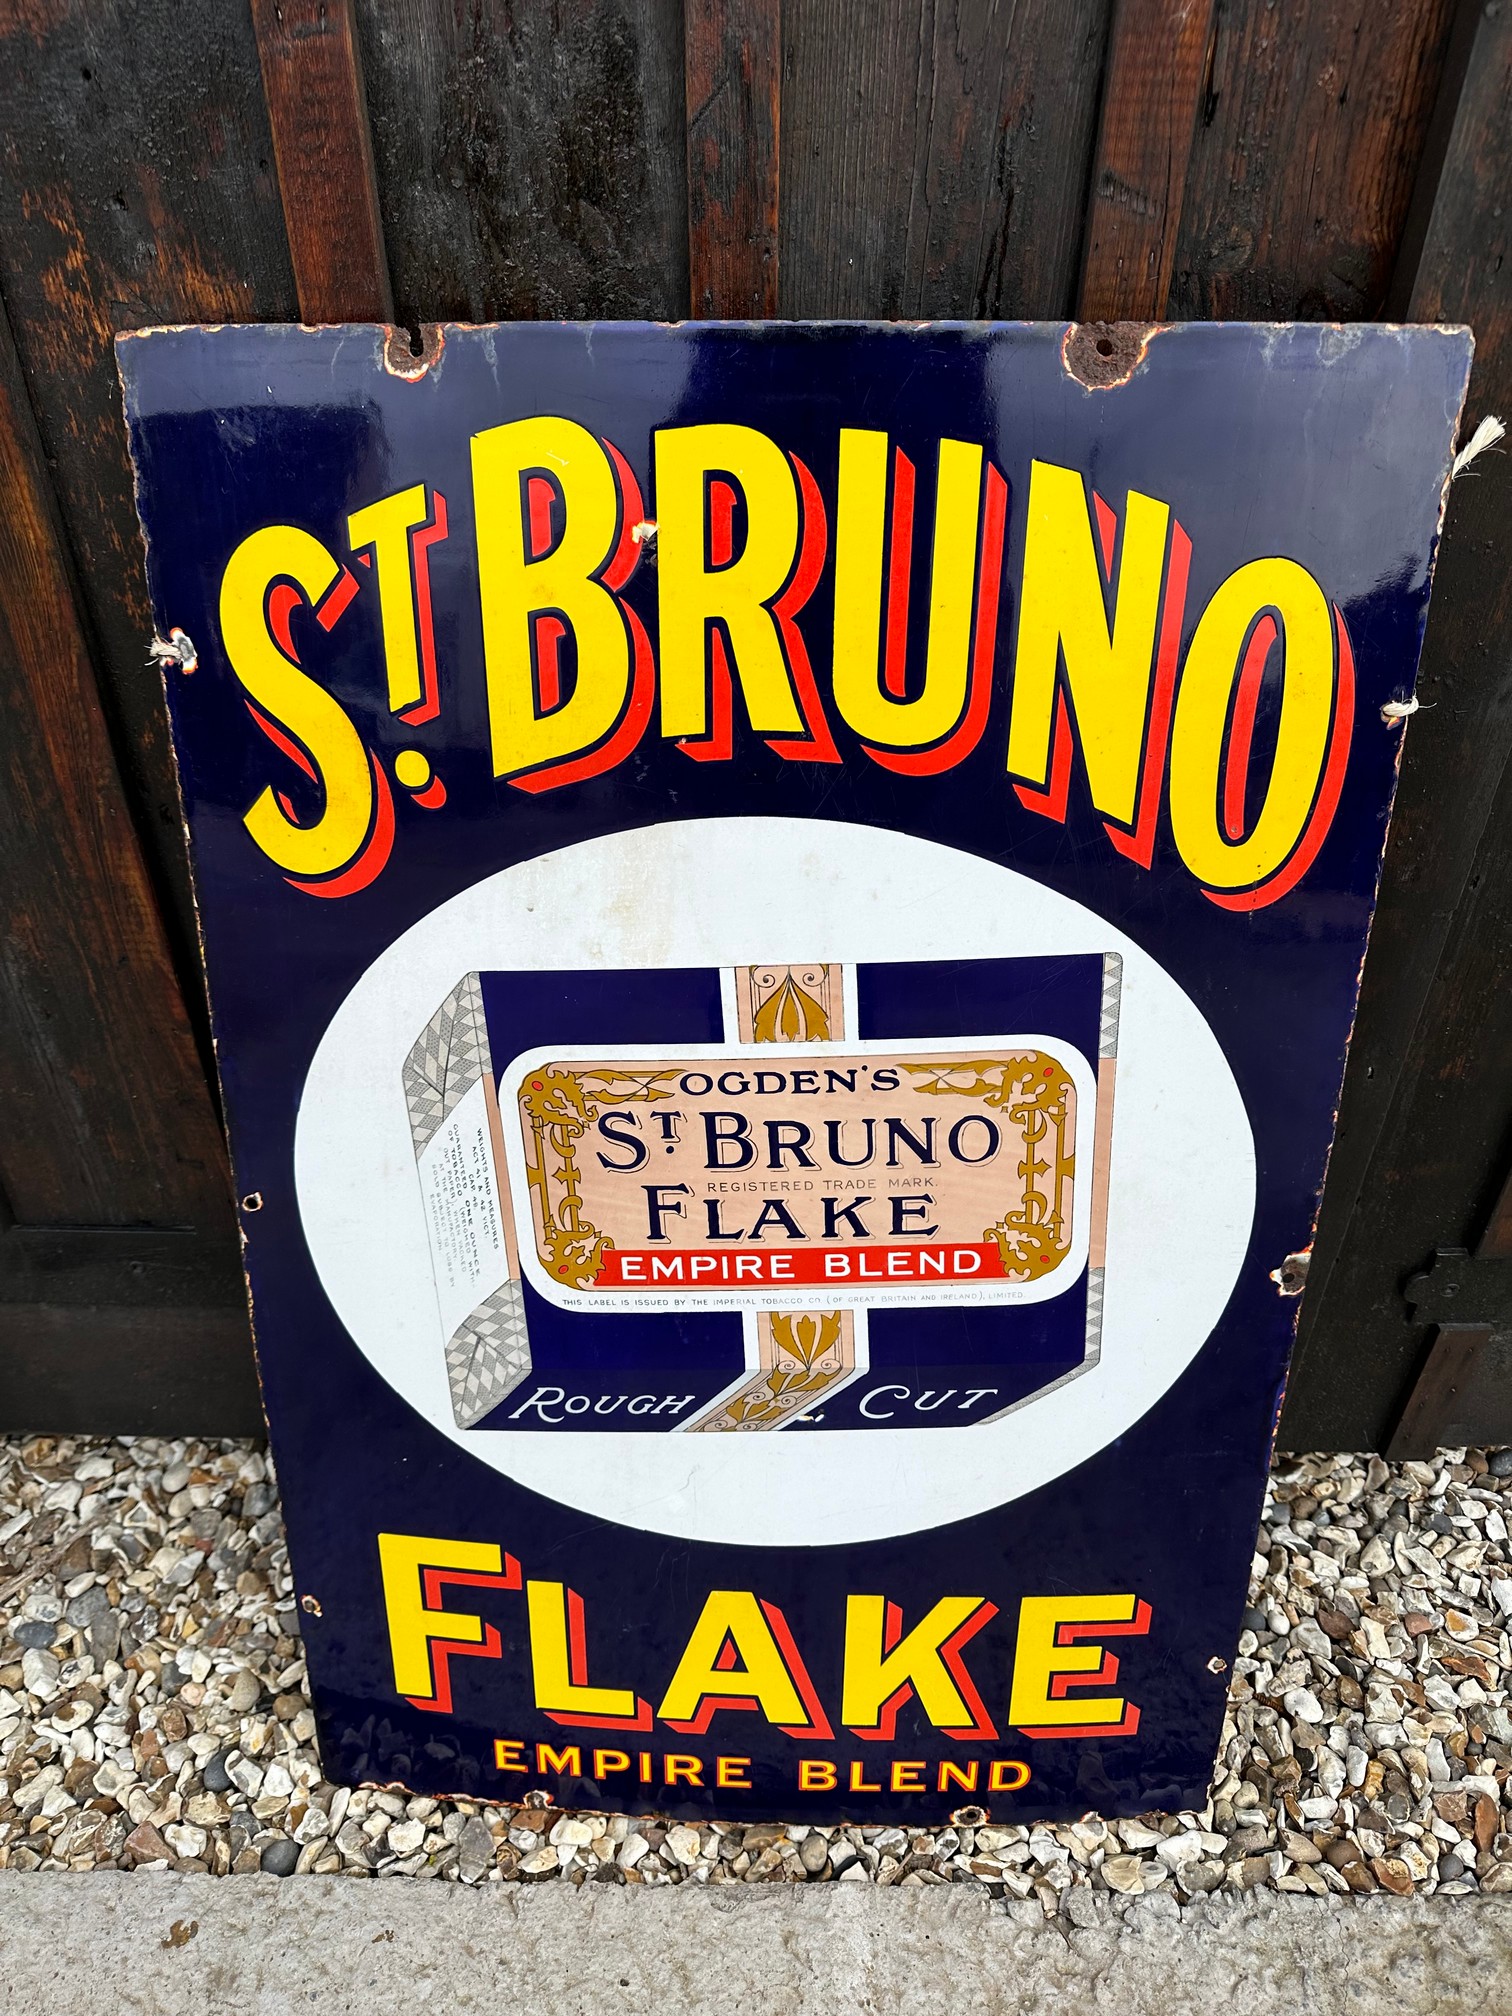 An Ogden's St. Bruno Flake pictorial enamel advertising sign in good condition, 24 x 36".